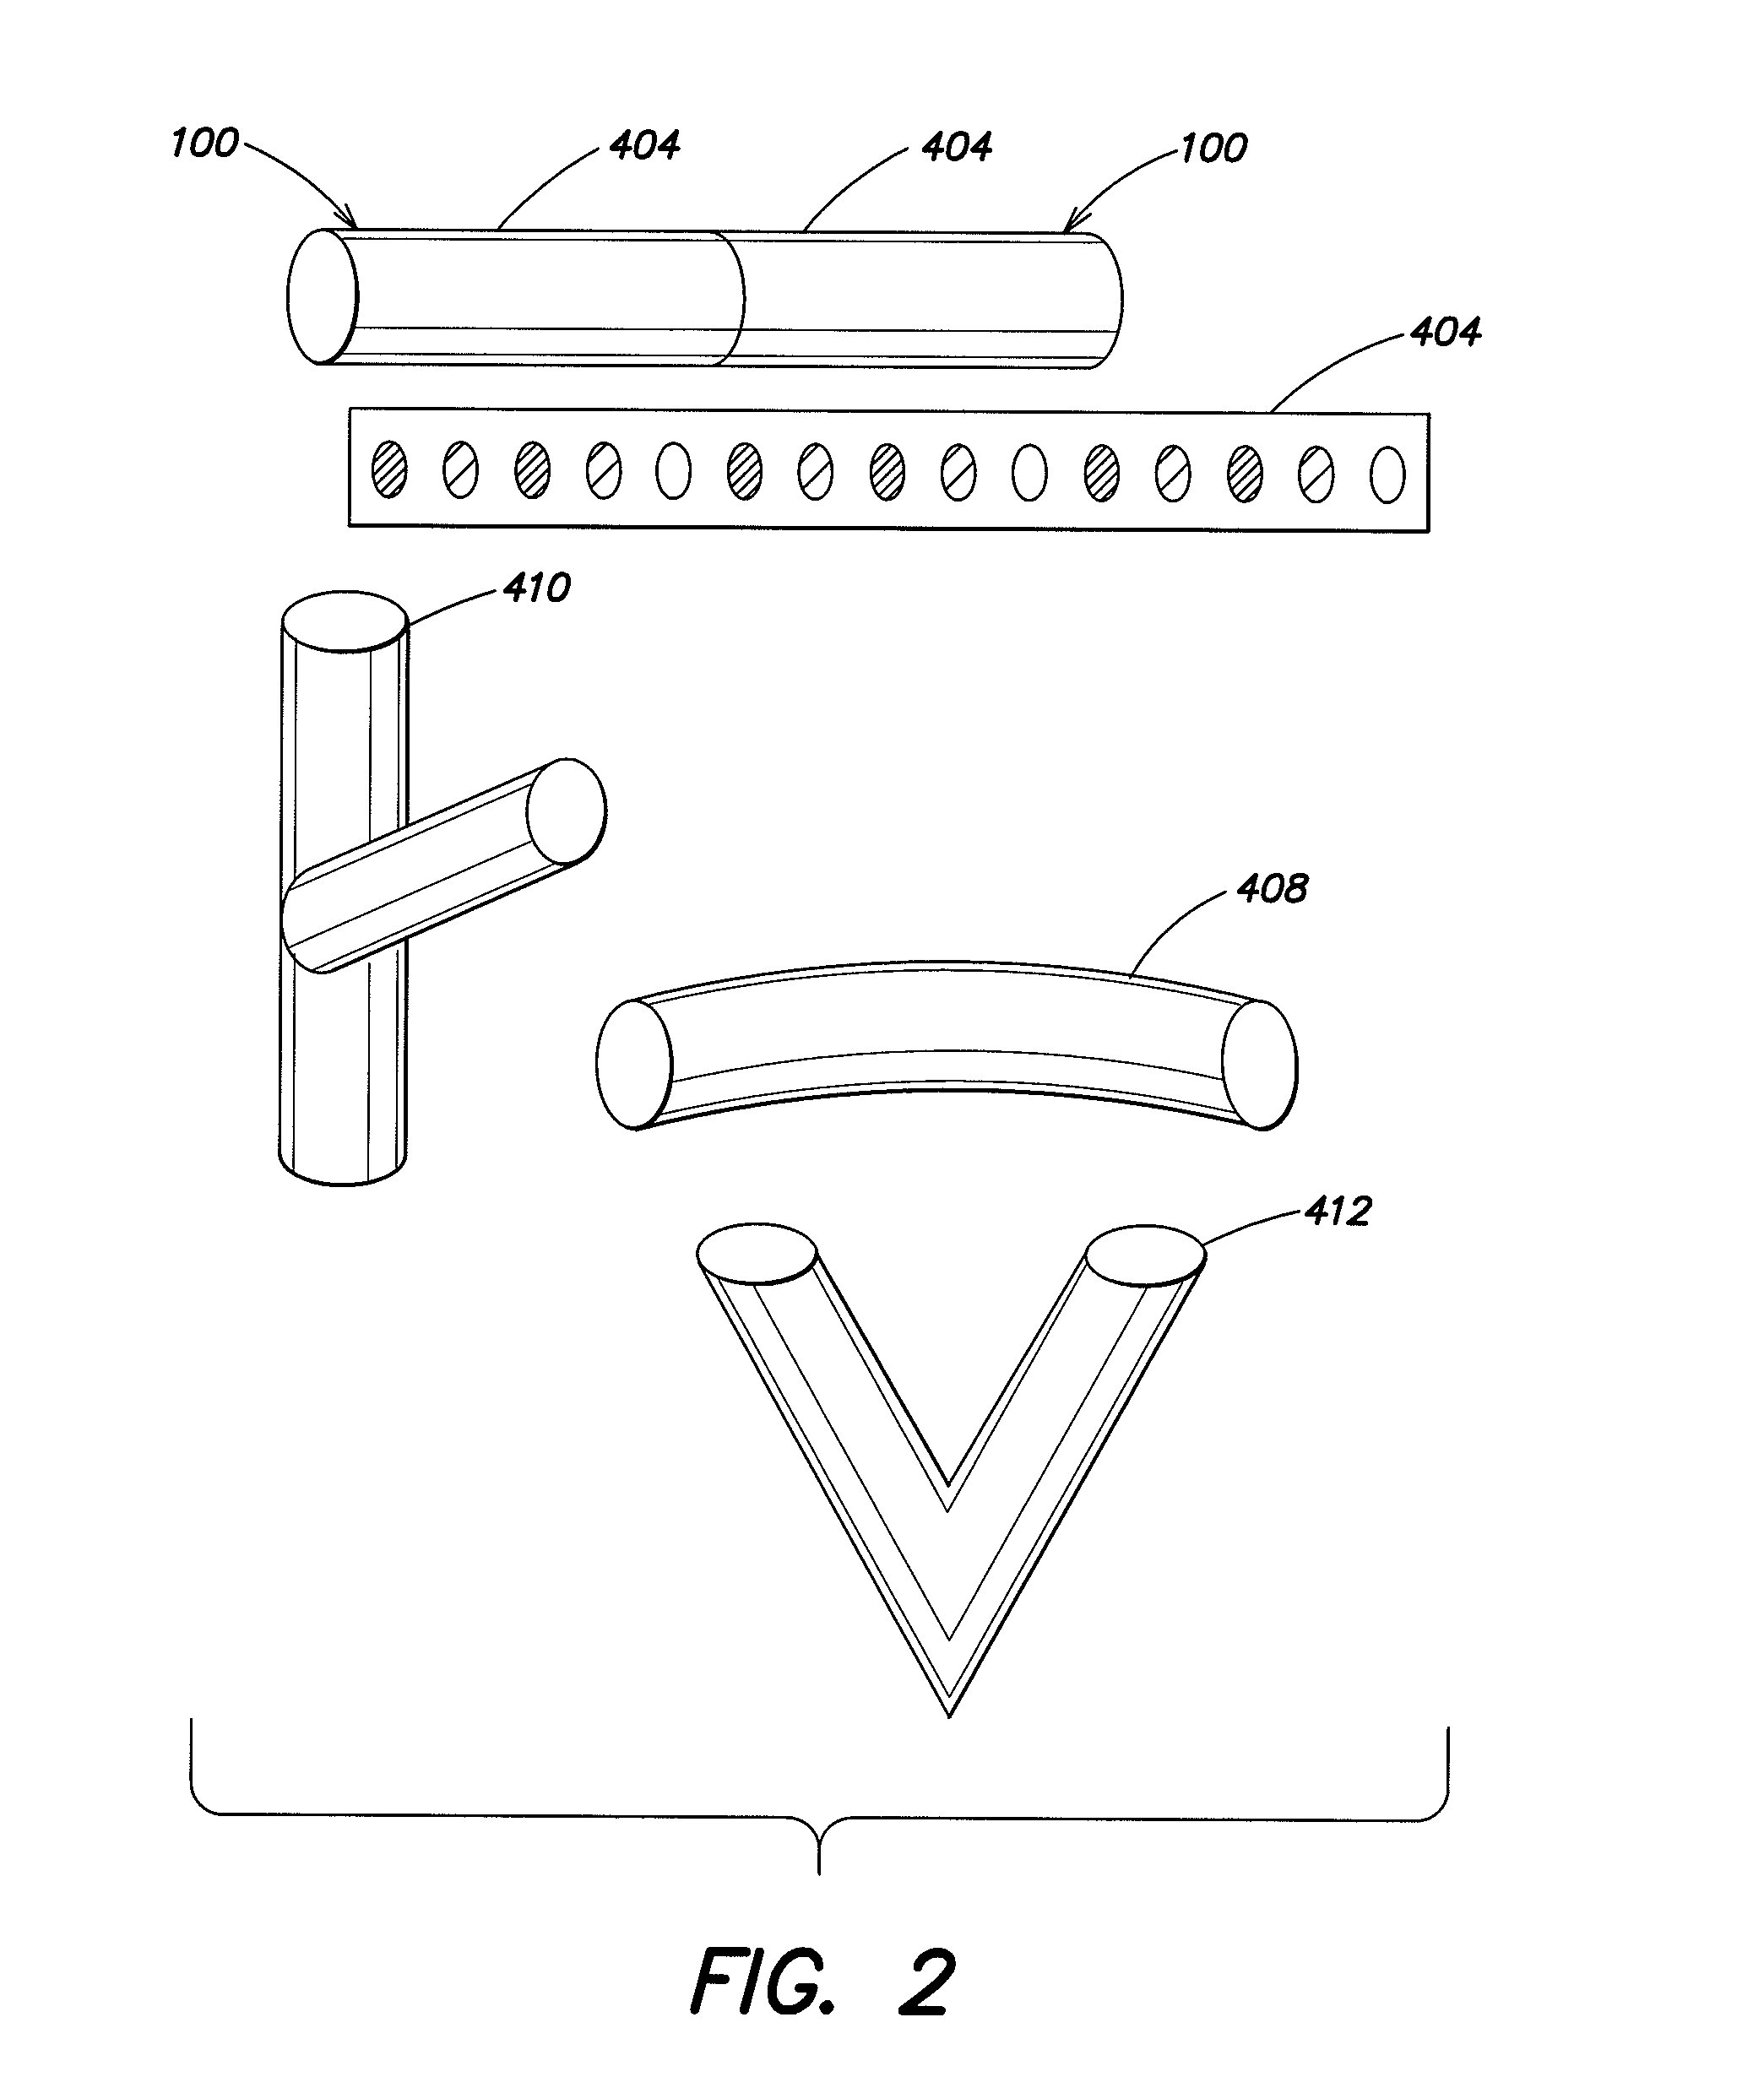 Networkable led-based lighting fixtures and methods for powering and controlling same